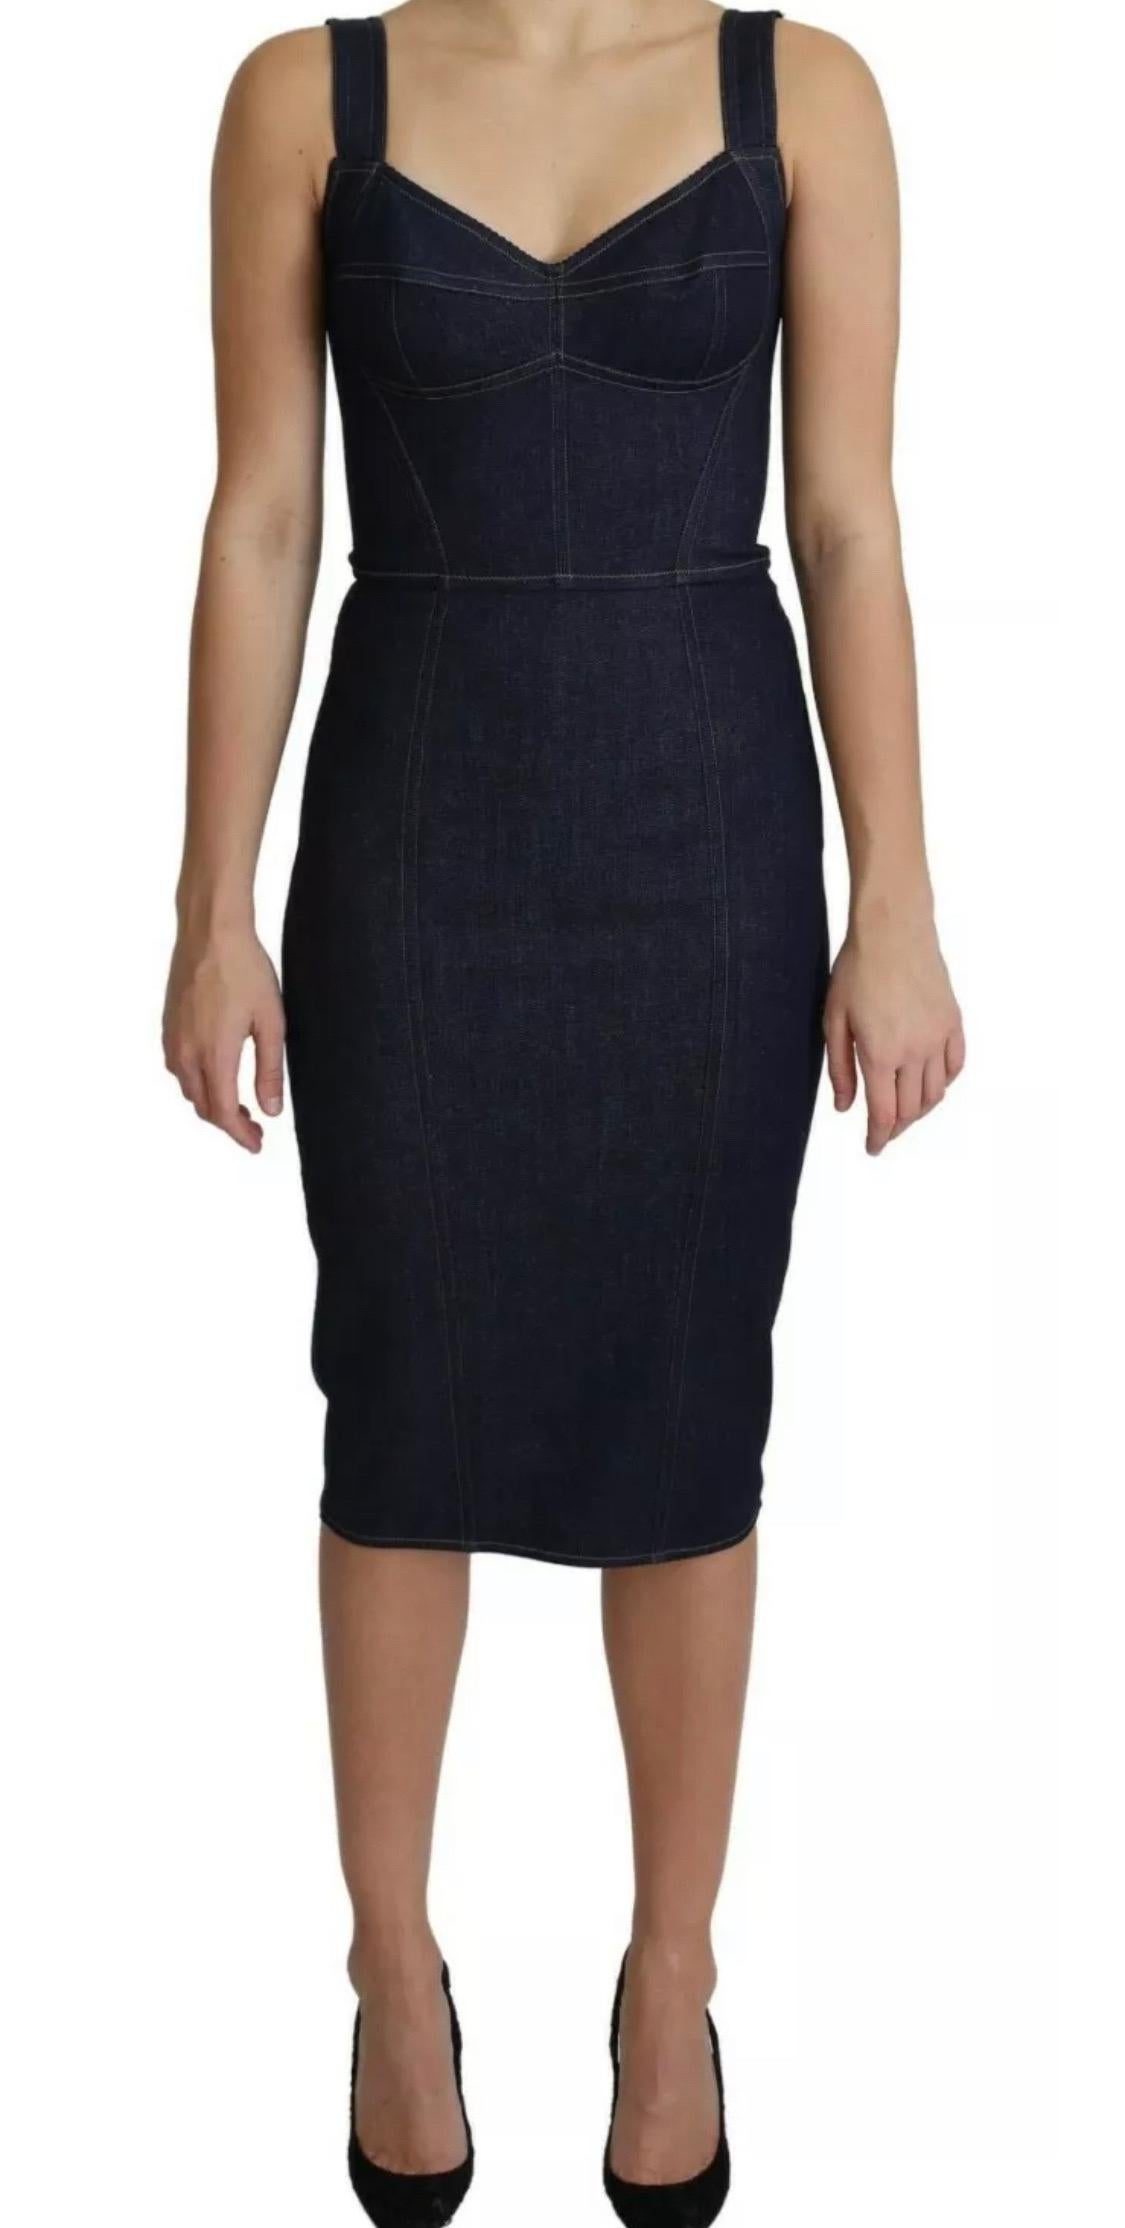 Dolce & Gabbana fitted dark blue denim casual dress features v-neck For Sale 4